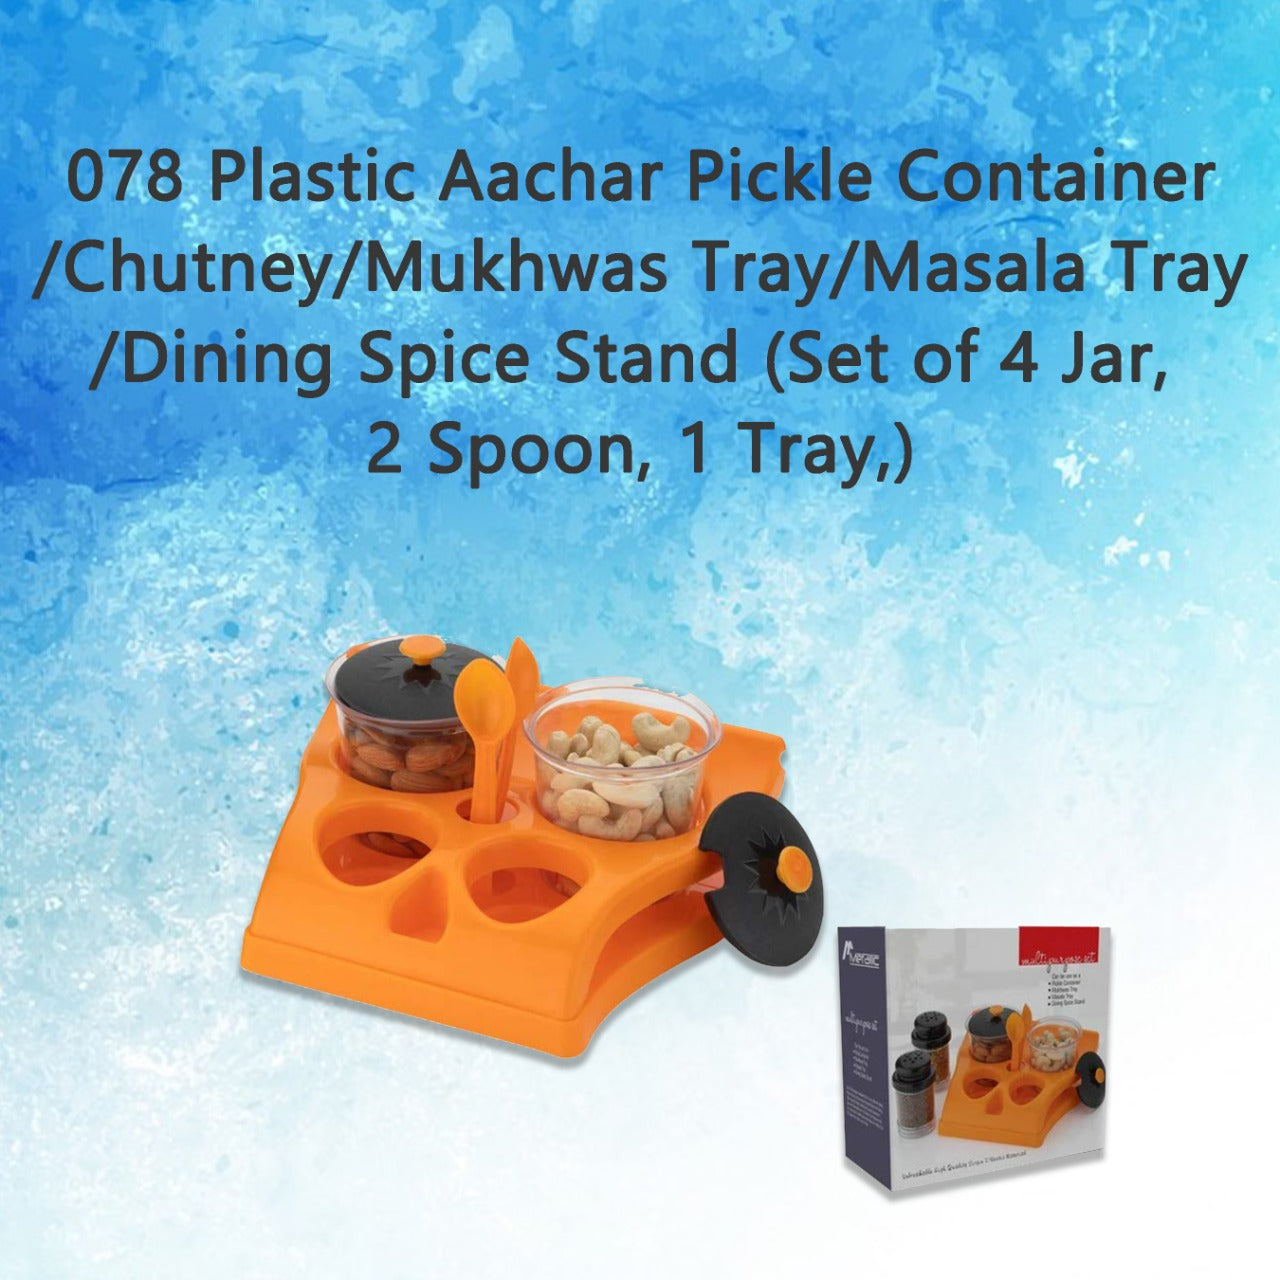 078 Plastic Aachar Pickle Container/Chutney/Mukhwas Tray/Masala Tray/Dining Spice Stand (Set of 4 Jar, 2 Spoon, 1 Tray,) DeoDap